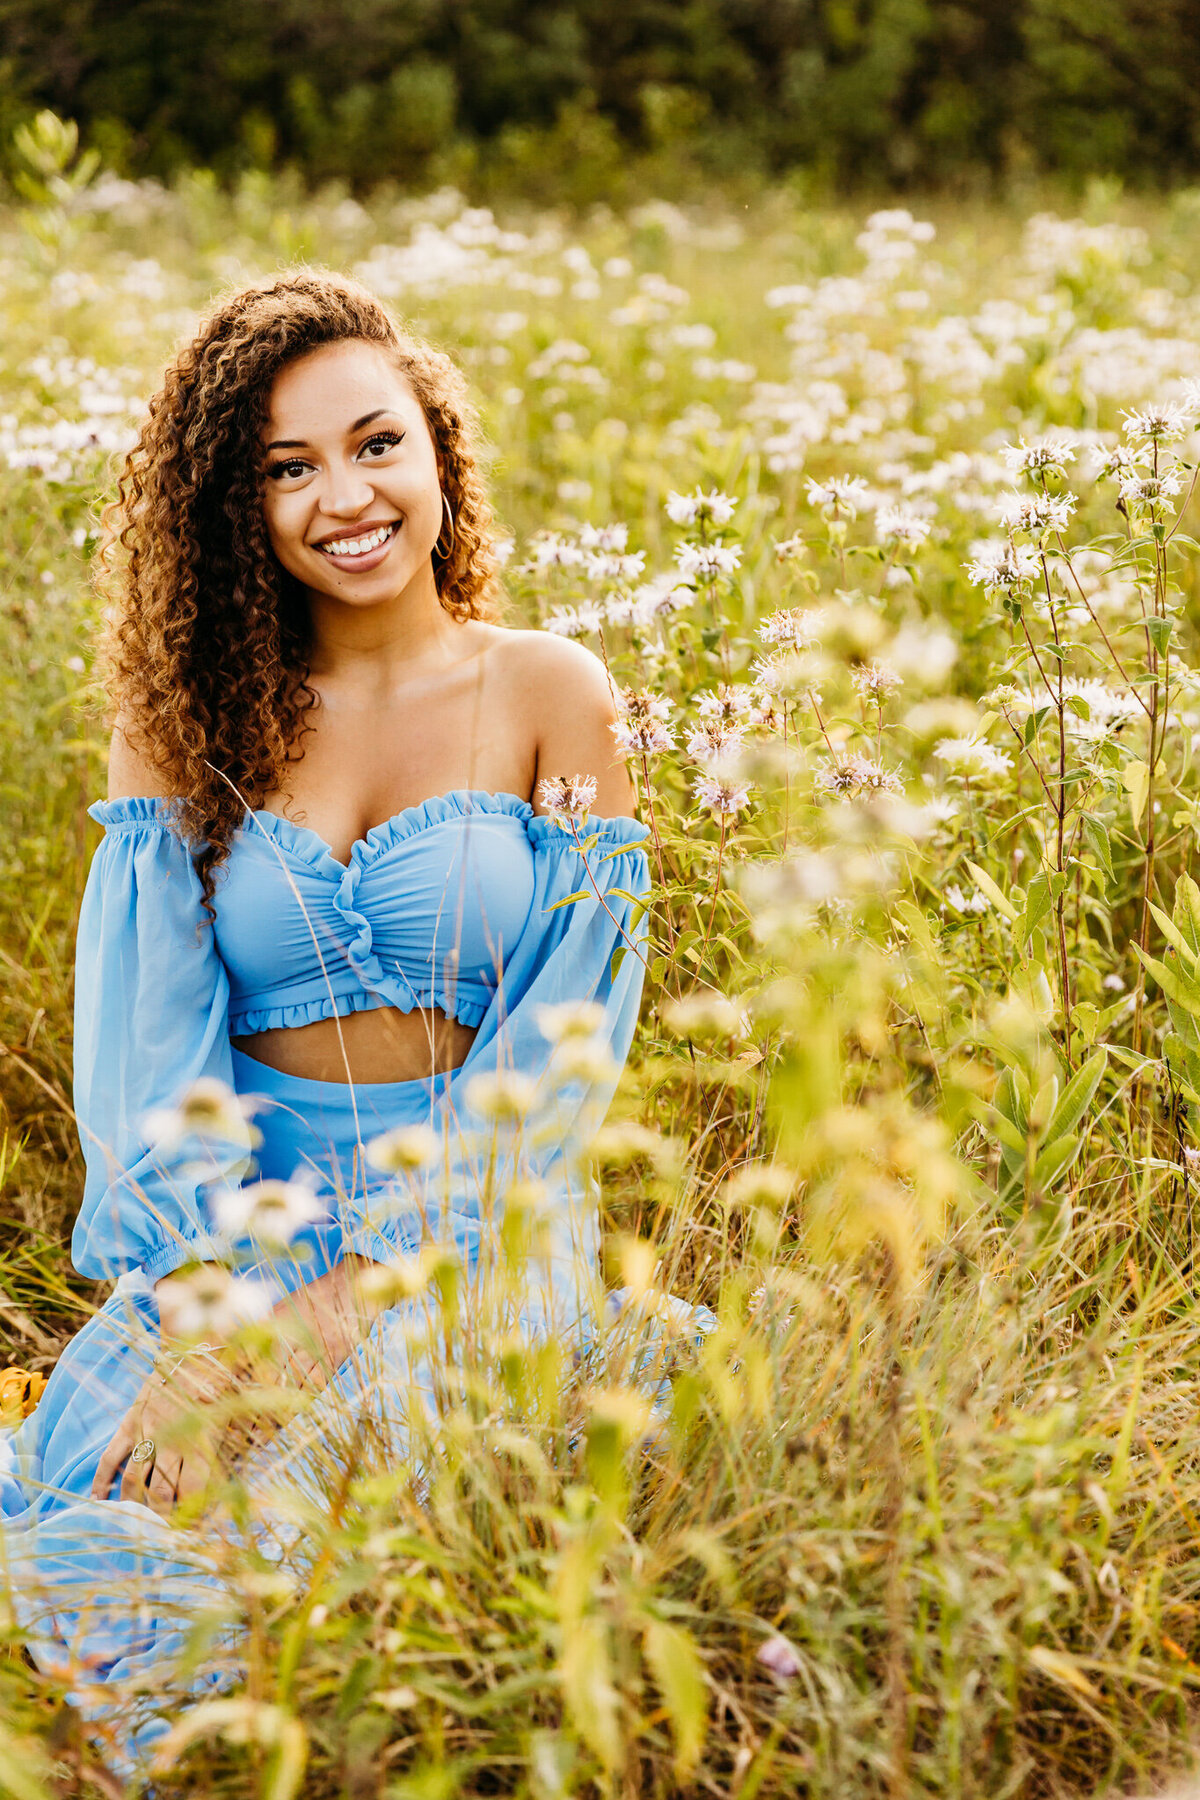 beautiful young woman with curly hair smiling while sitting in a field of bee balm in Oshkosh